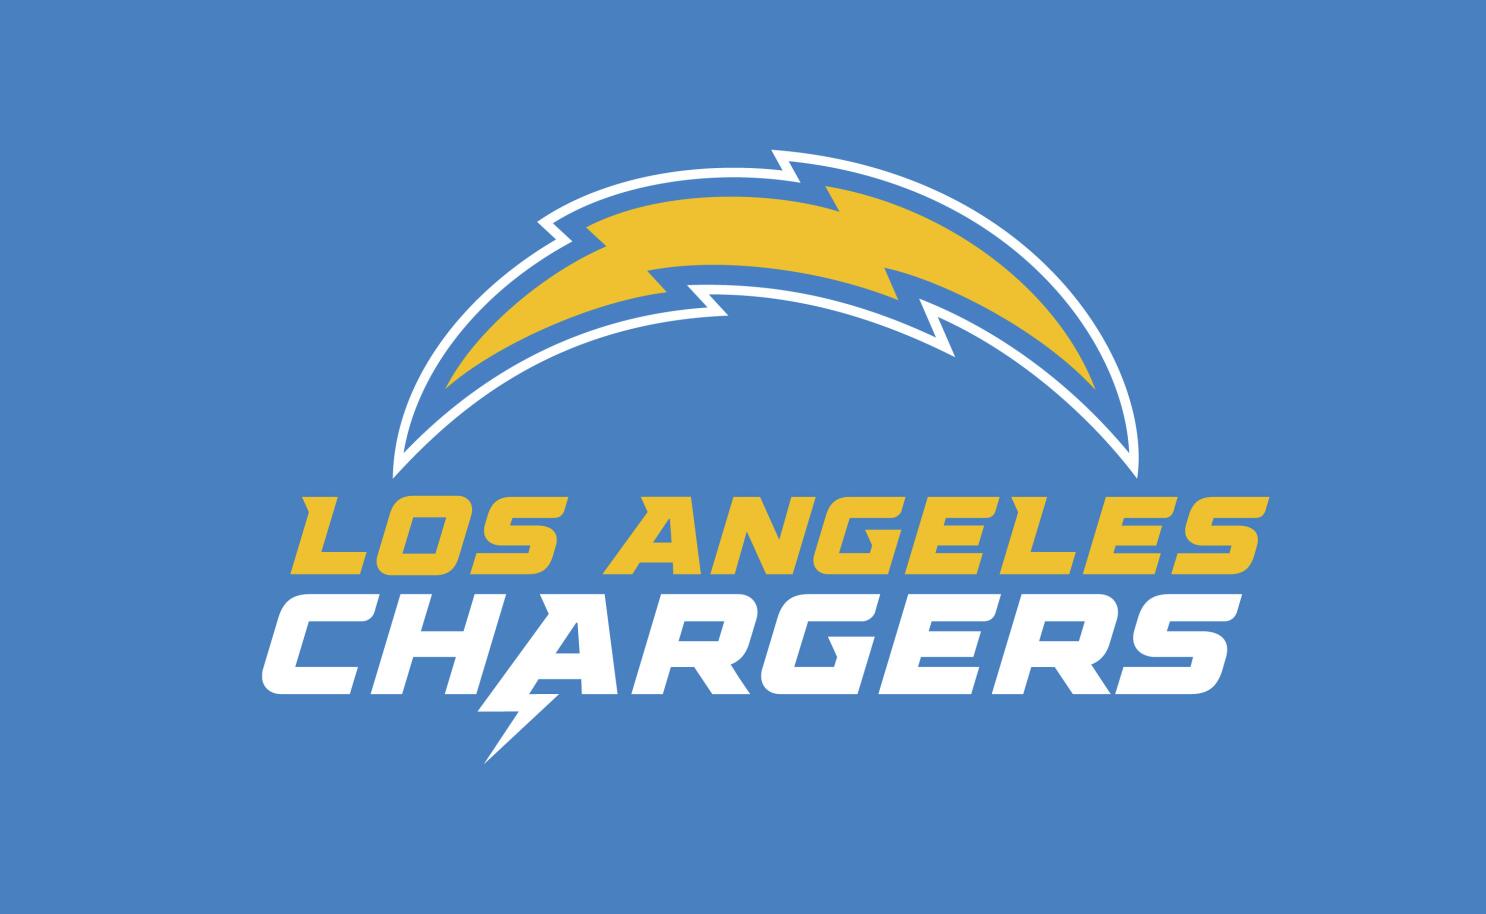 Shadows Dance In Erratic Patterns An Anti Abortion Message About Los Angeles chargers…